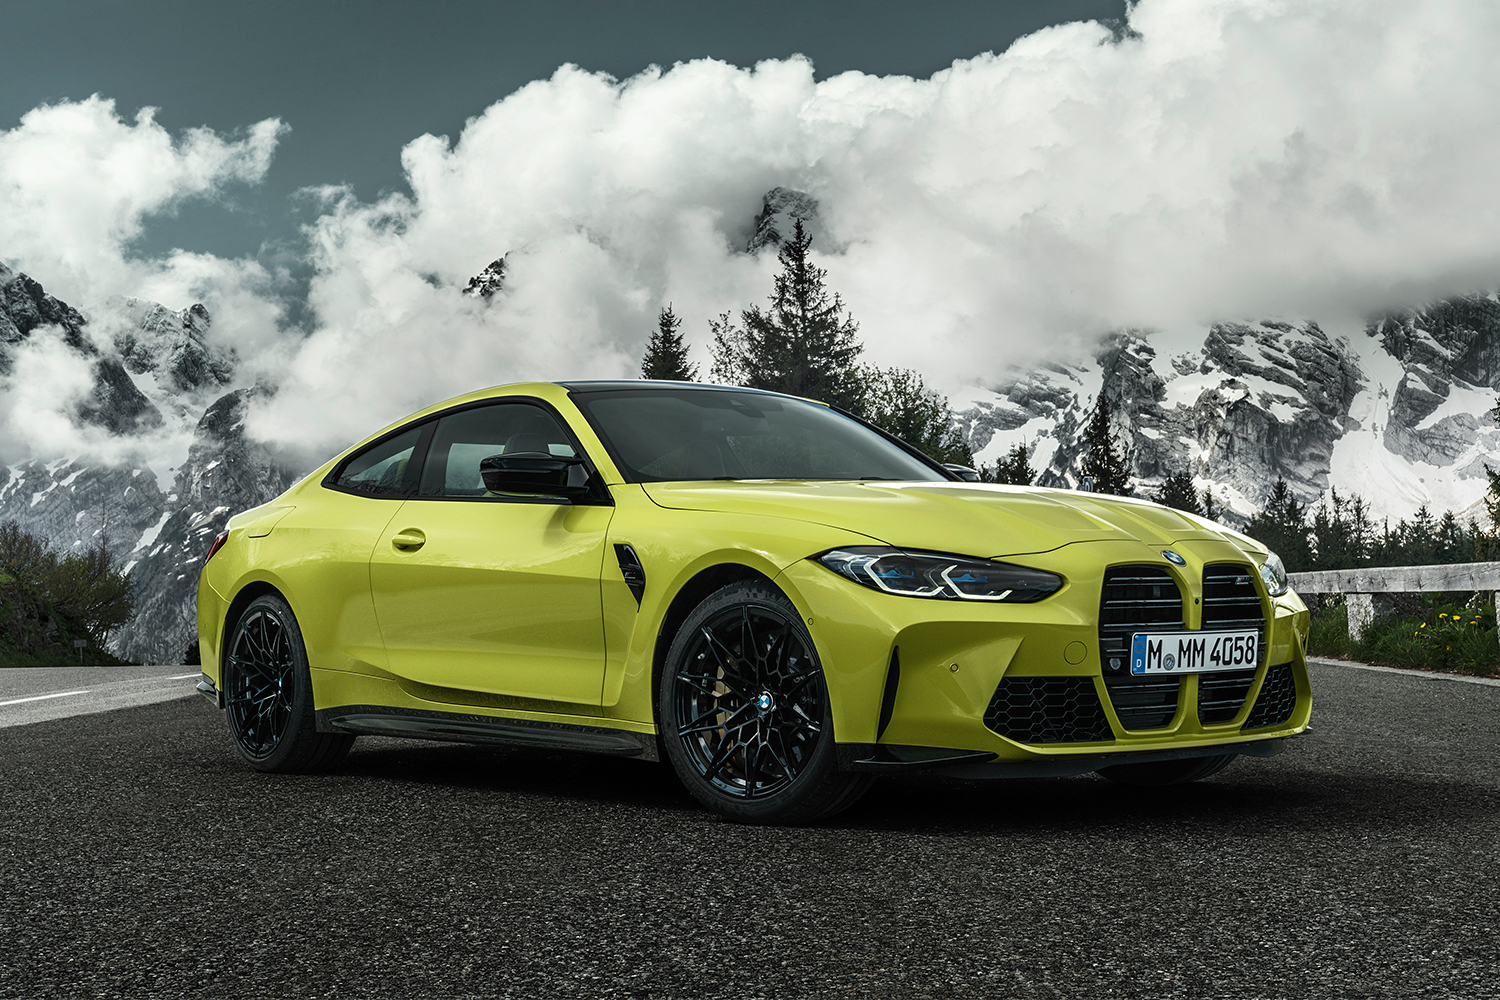 The new BMW M4 Competition Coupé in yellow sits still on the road with snowy mountains and trees at the cloud line in the background